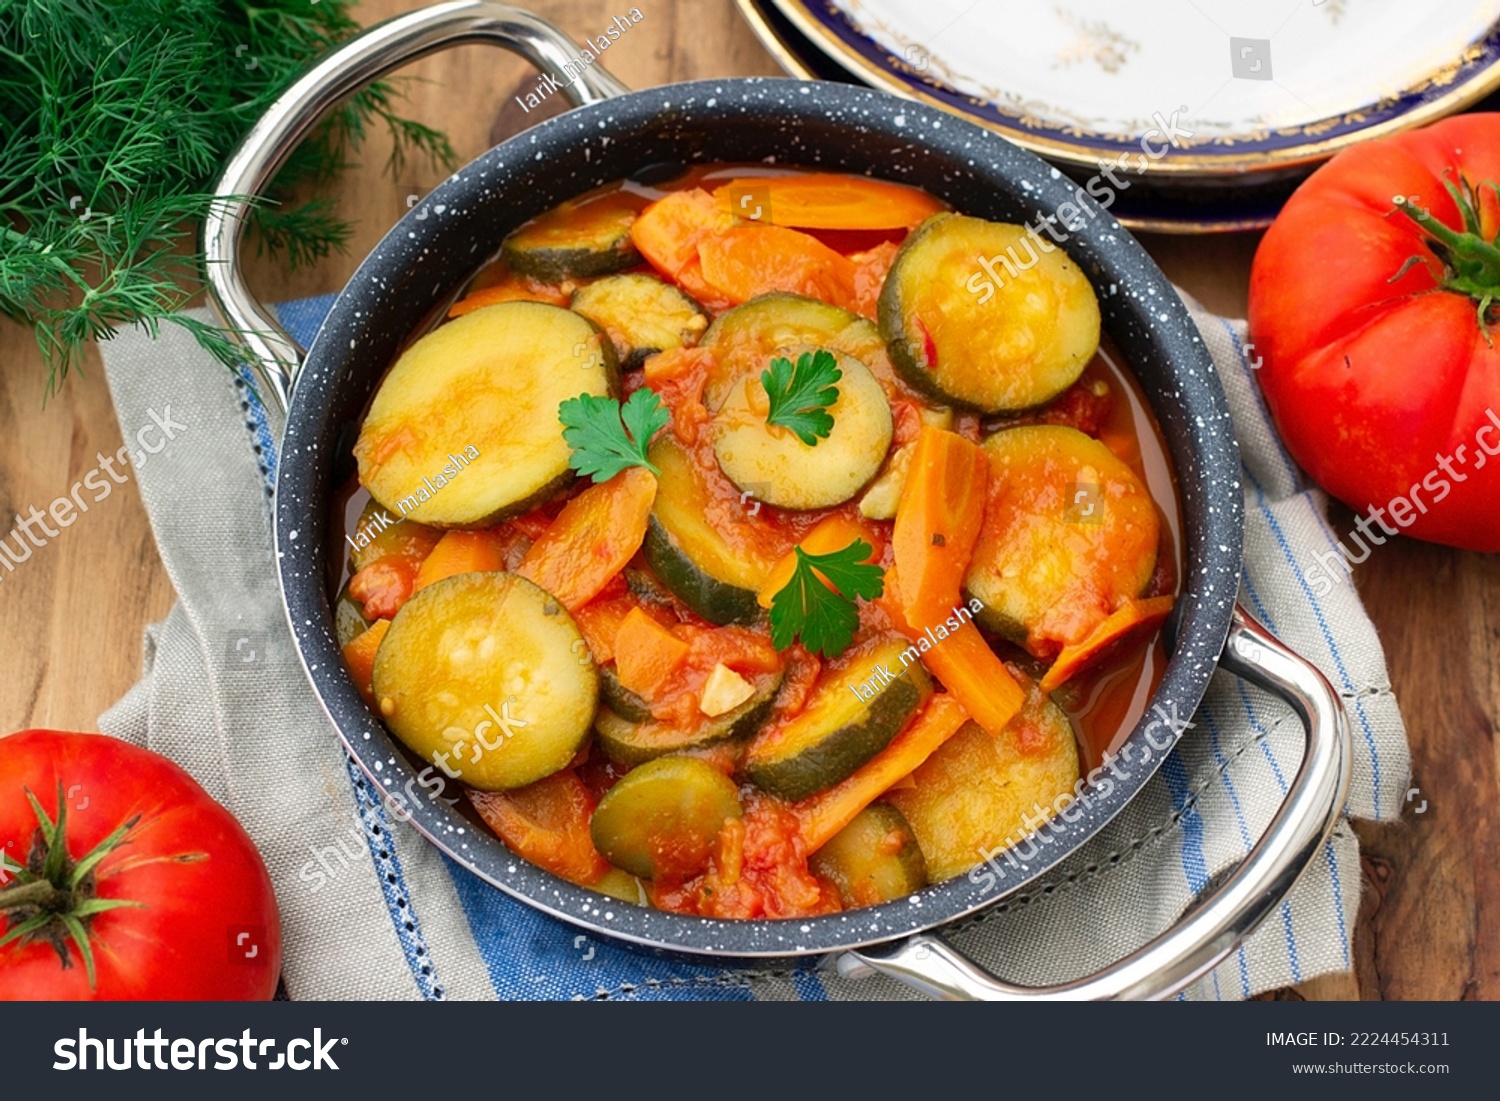 Vegetarian zucchini stew with carrots, garlic and tomatoes #2224454311